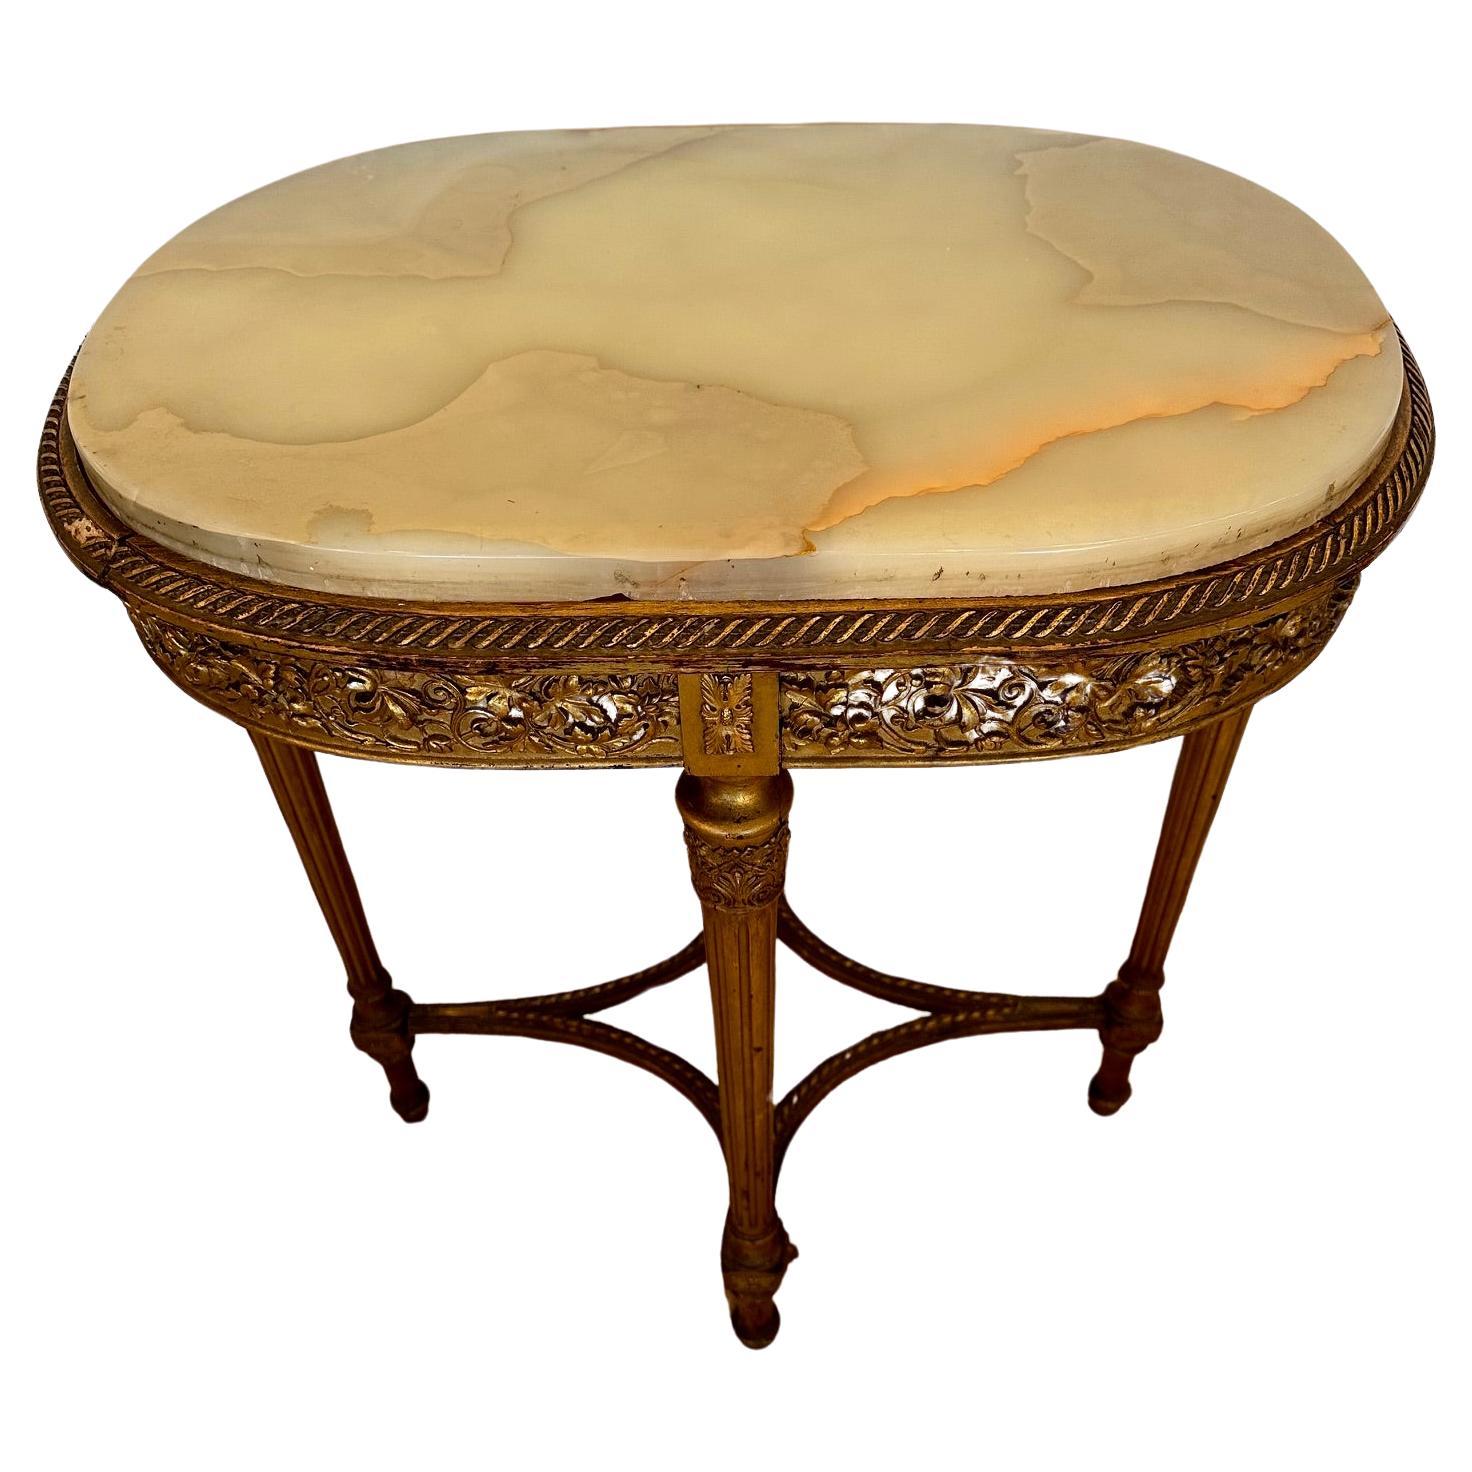 Ornate French Louis XVI Style Giltwood Oval Side Table with Marble Top For Sale